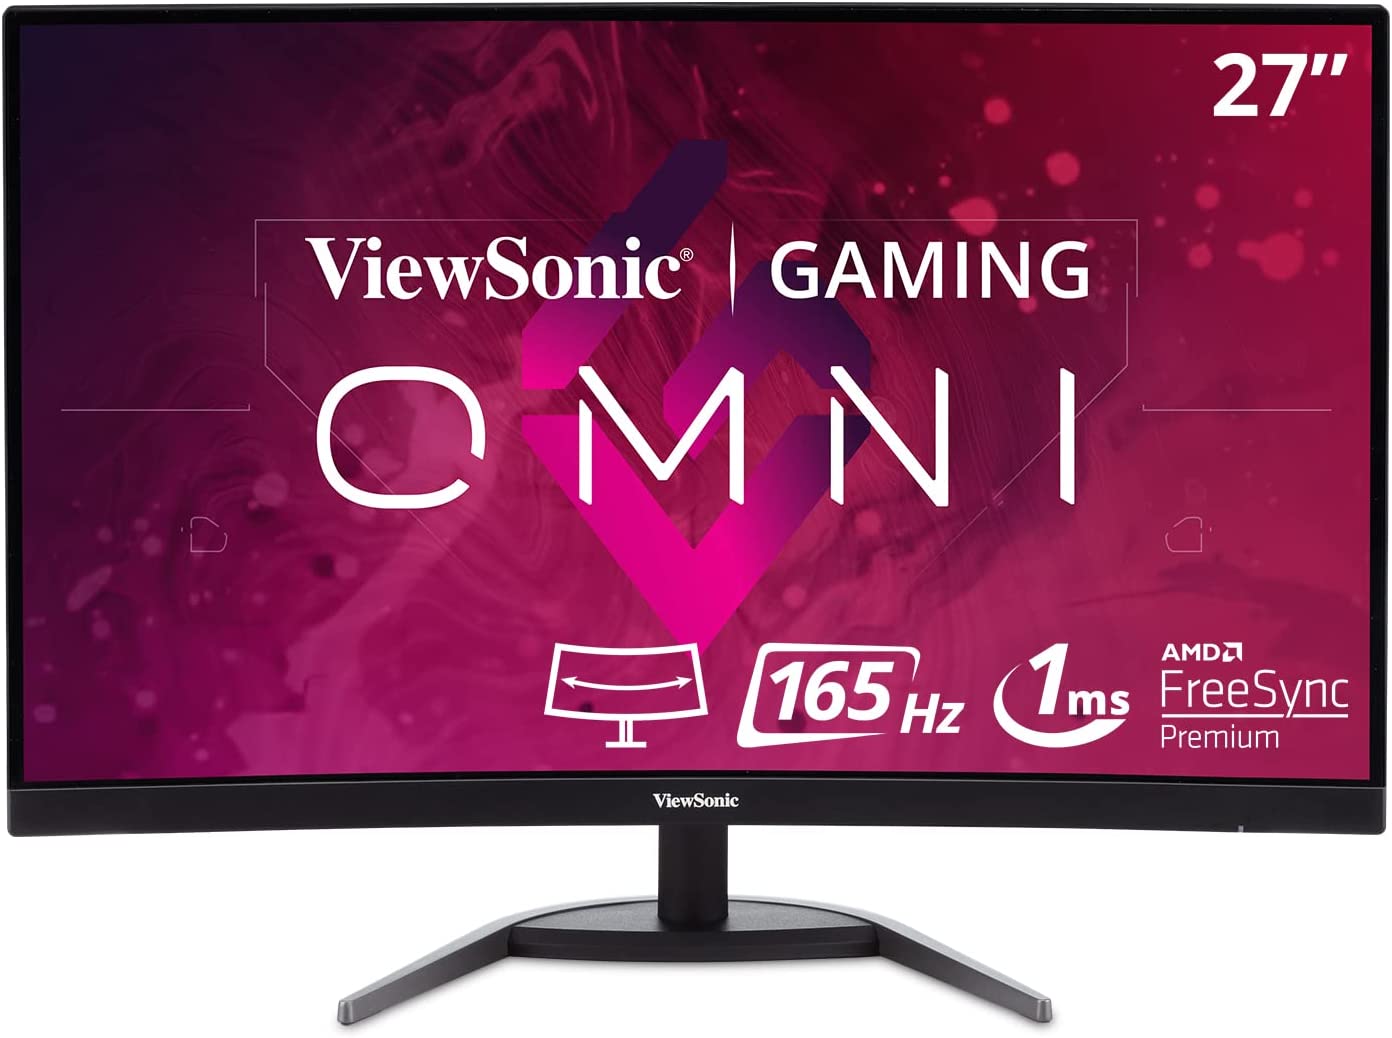 Viewsonic 27" Curved Gaming Monitor